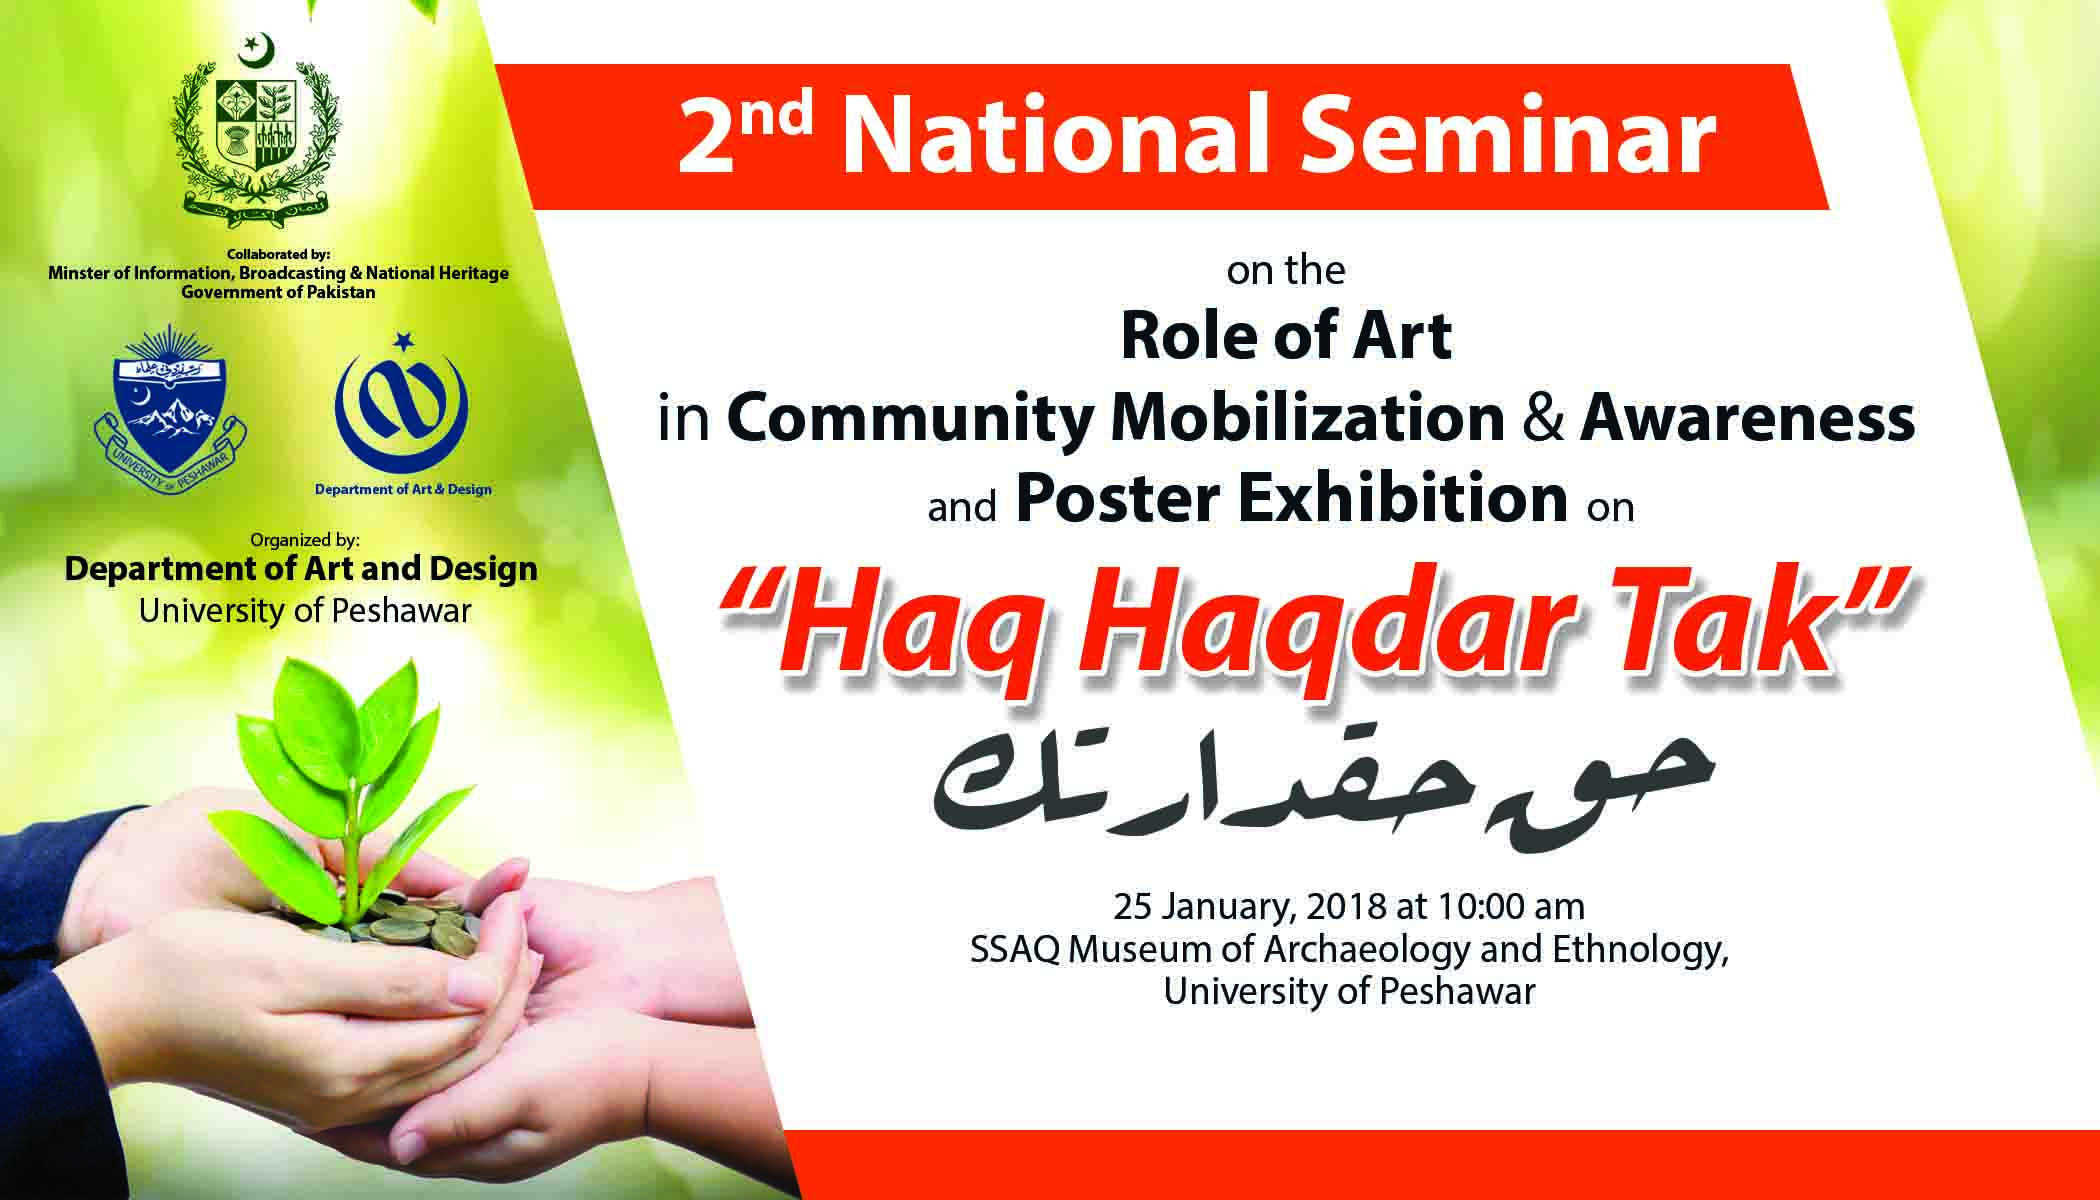 National Seminar on the Role of Art in Community Mobilization & Awareness